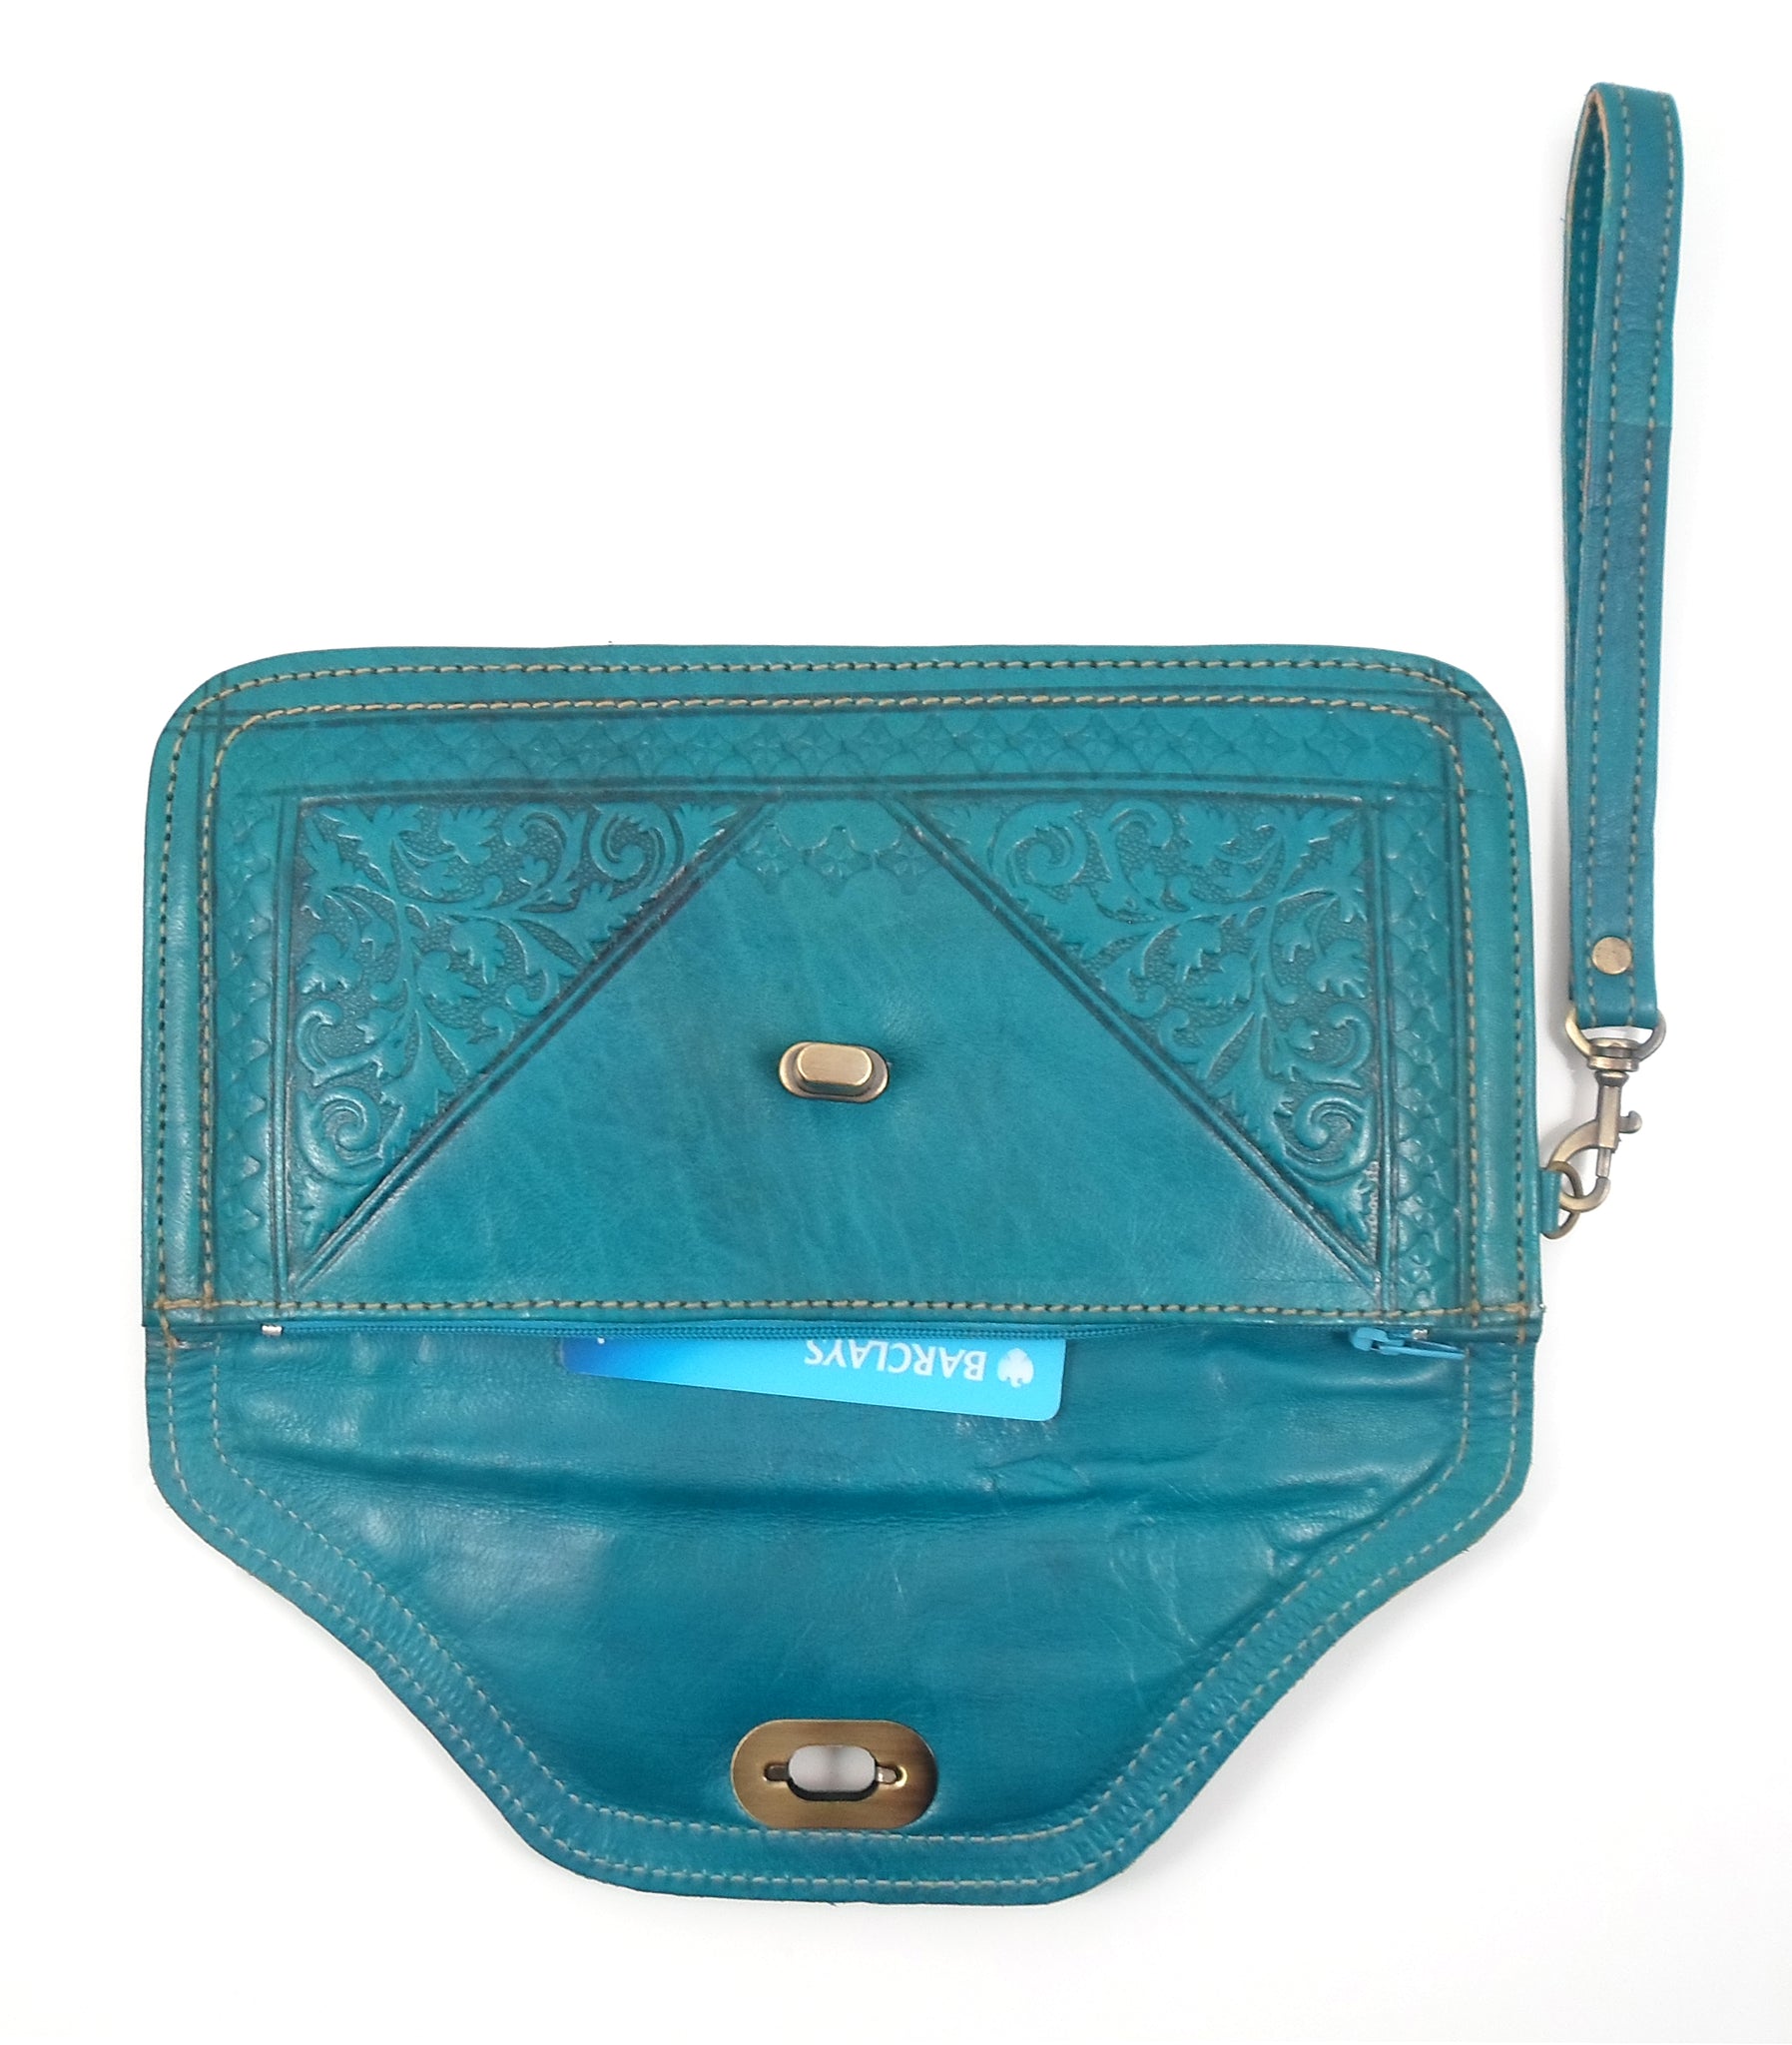 Teal Leather Clutch Bag